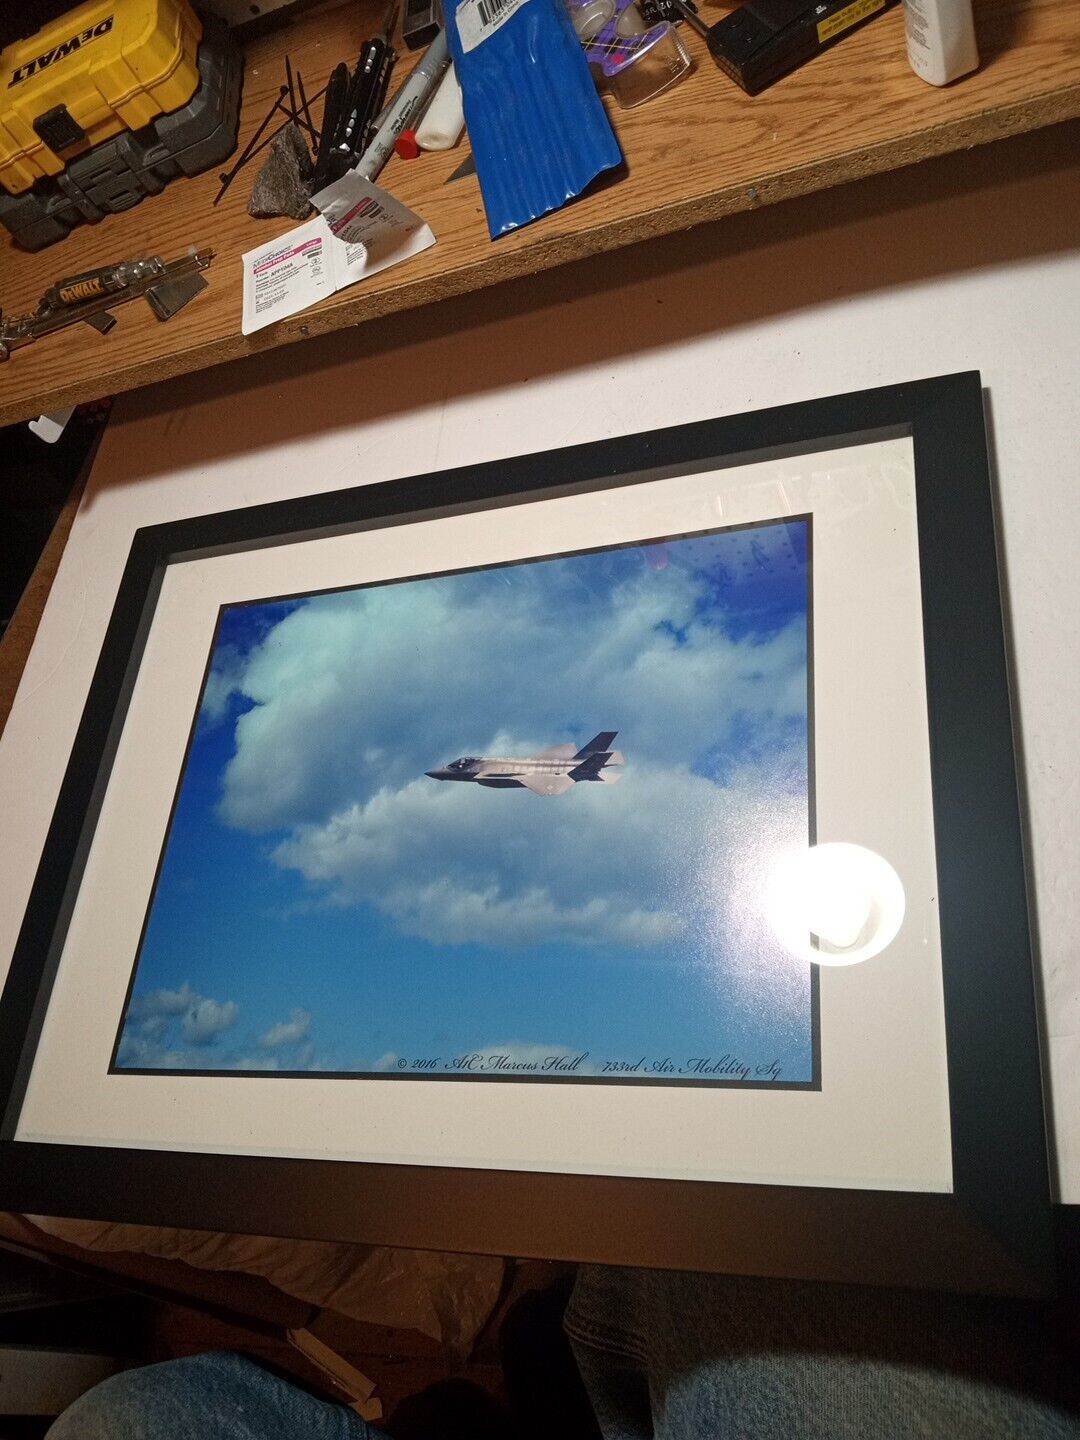 LOWERED PRICE F-22 RAPTOR PHOTO IN FRAME- ORIGINAL PHOTO BY PILOT 16\